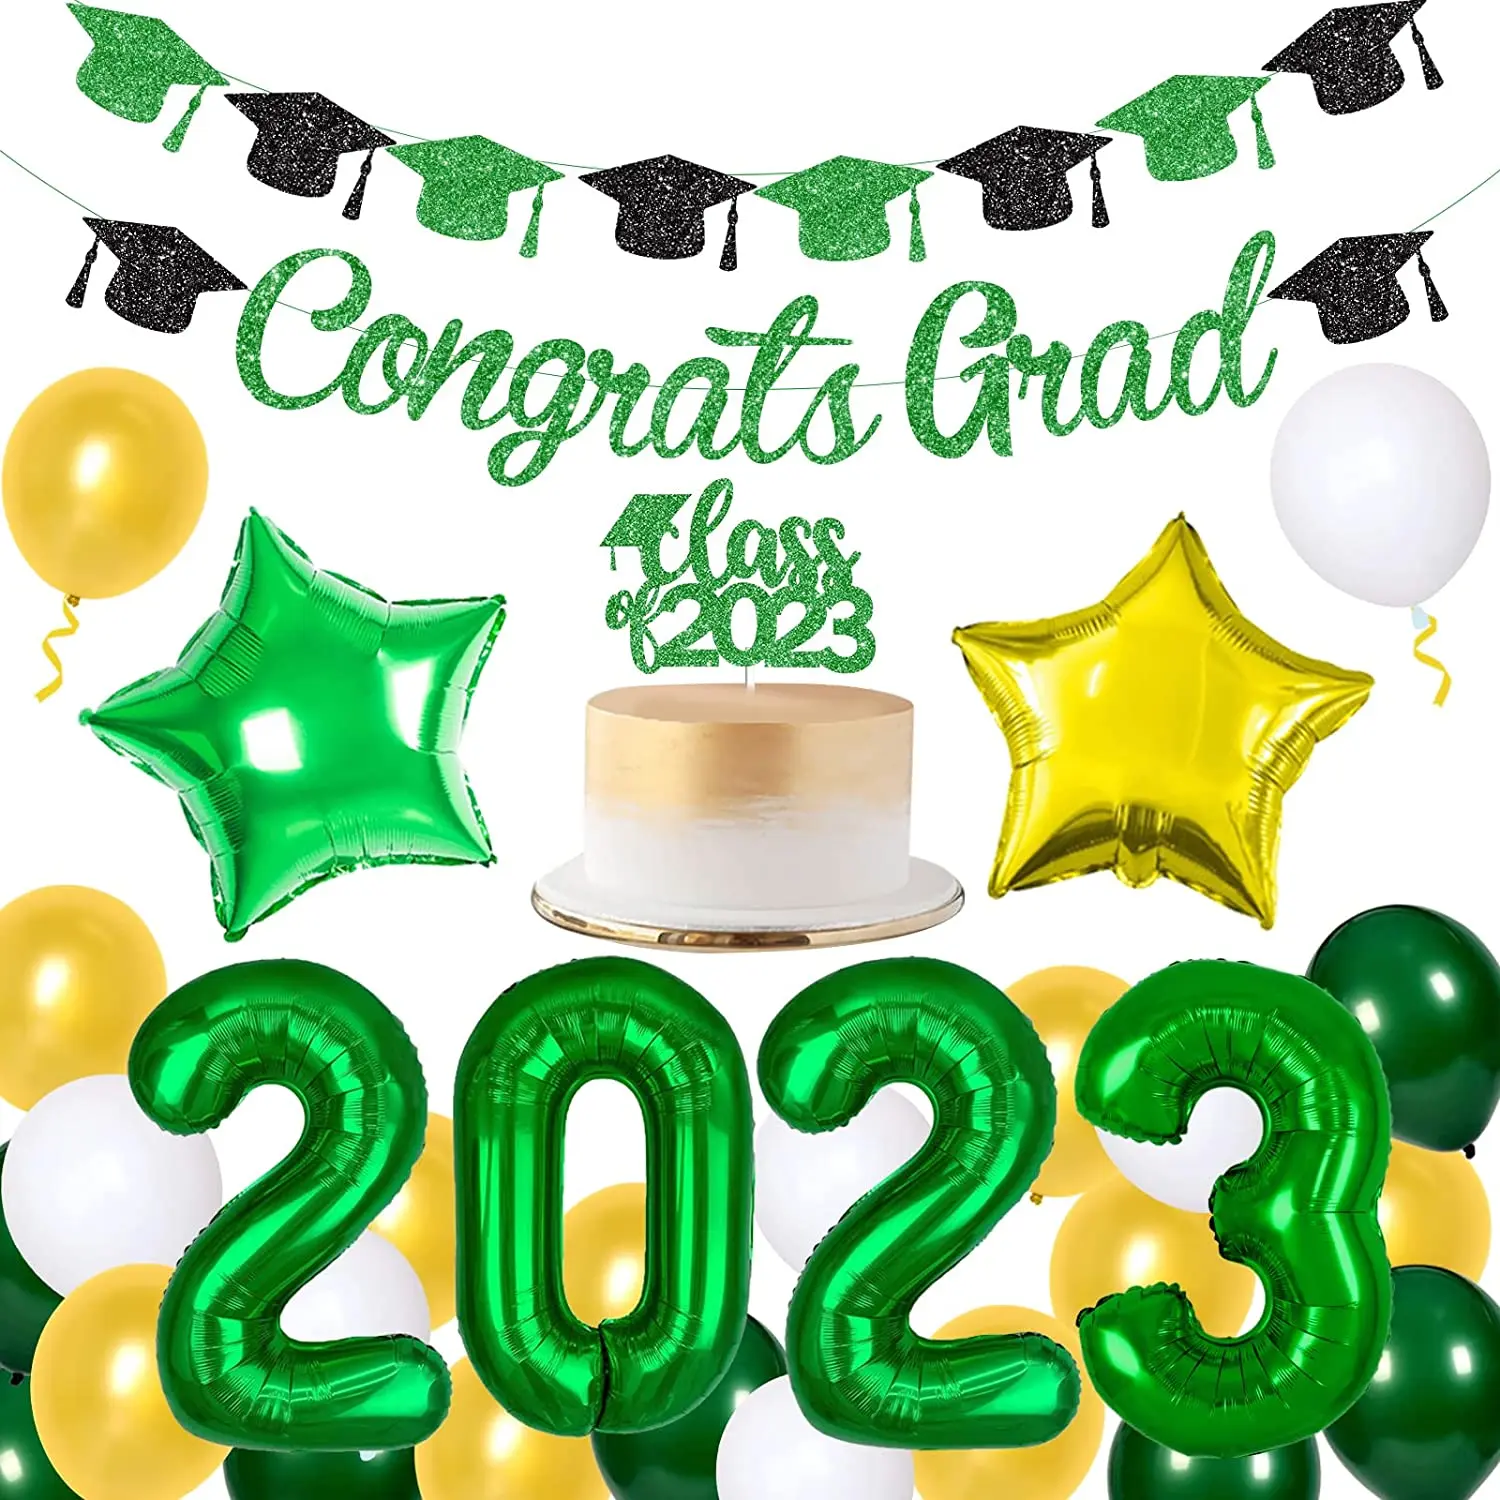 

KREATWOW Green and Gold Graduation Party Decorations 2023 Foil Balloons Congrats Grad Banner Garland Class of 2023 Cake Topper